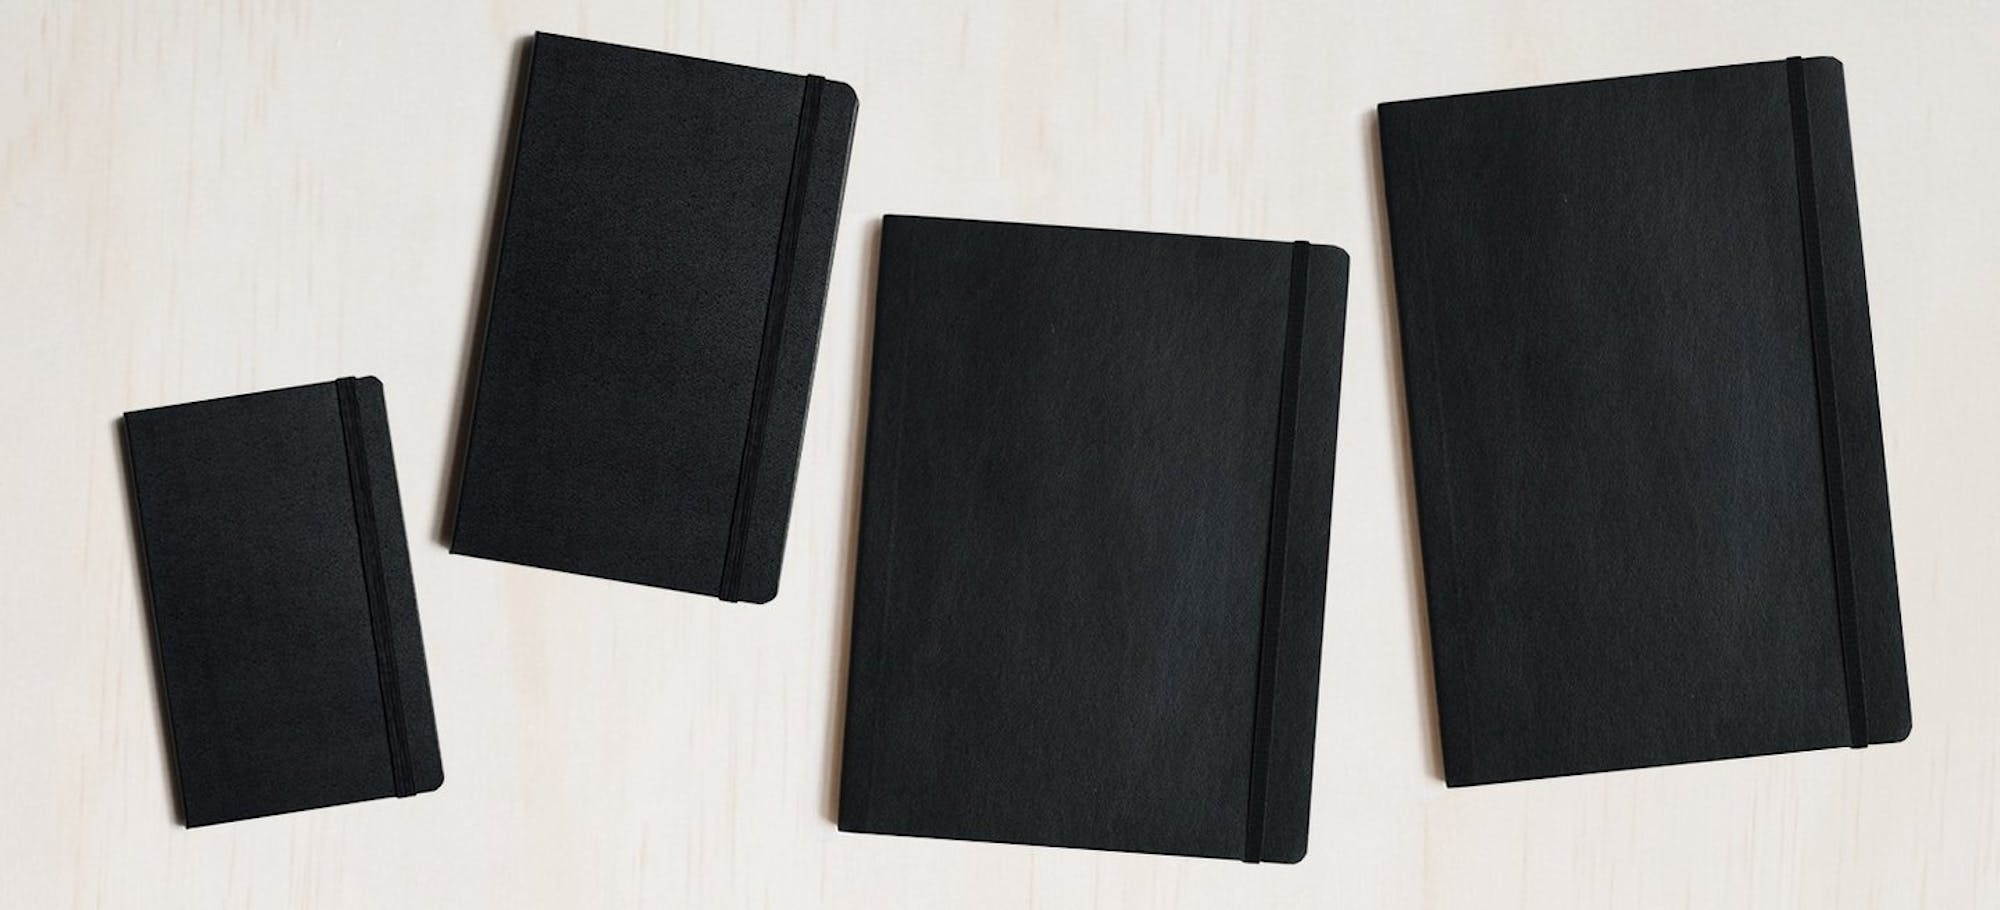 A4 vs A5 Notebook: Which Size is Right for You?